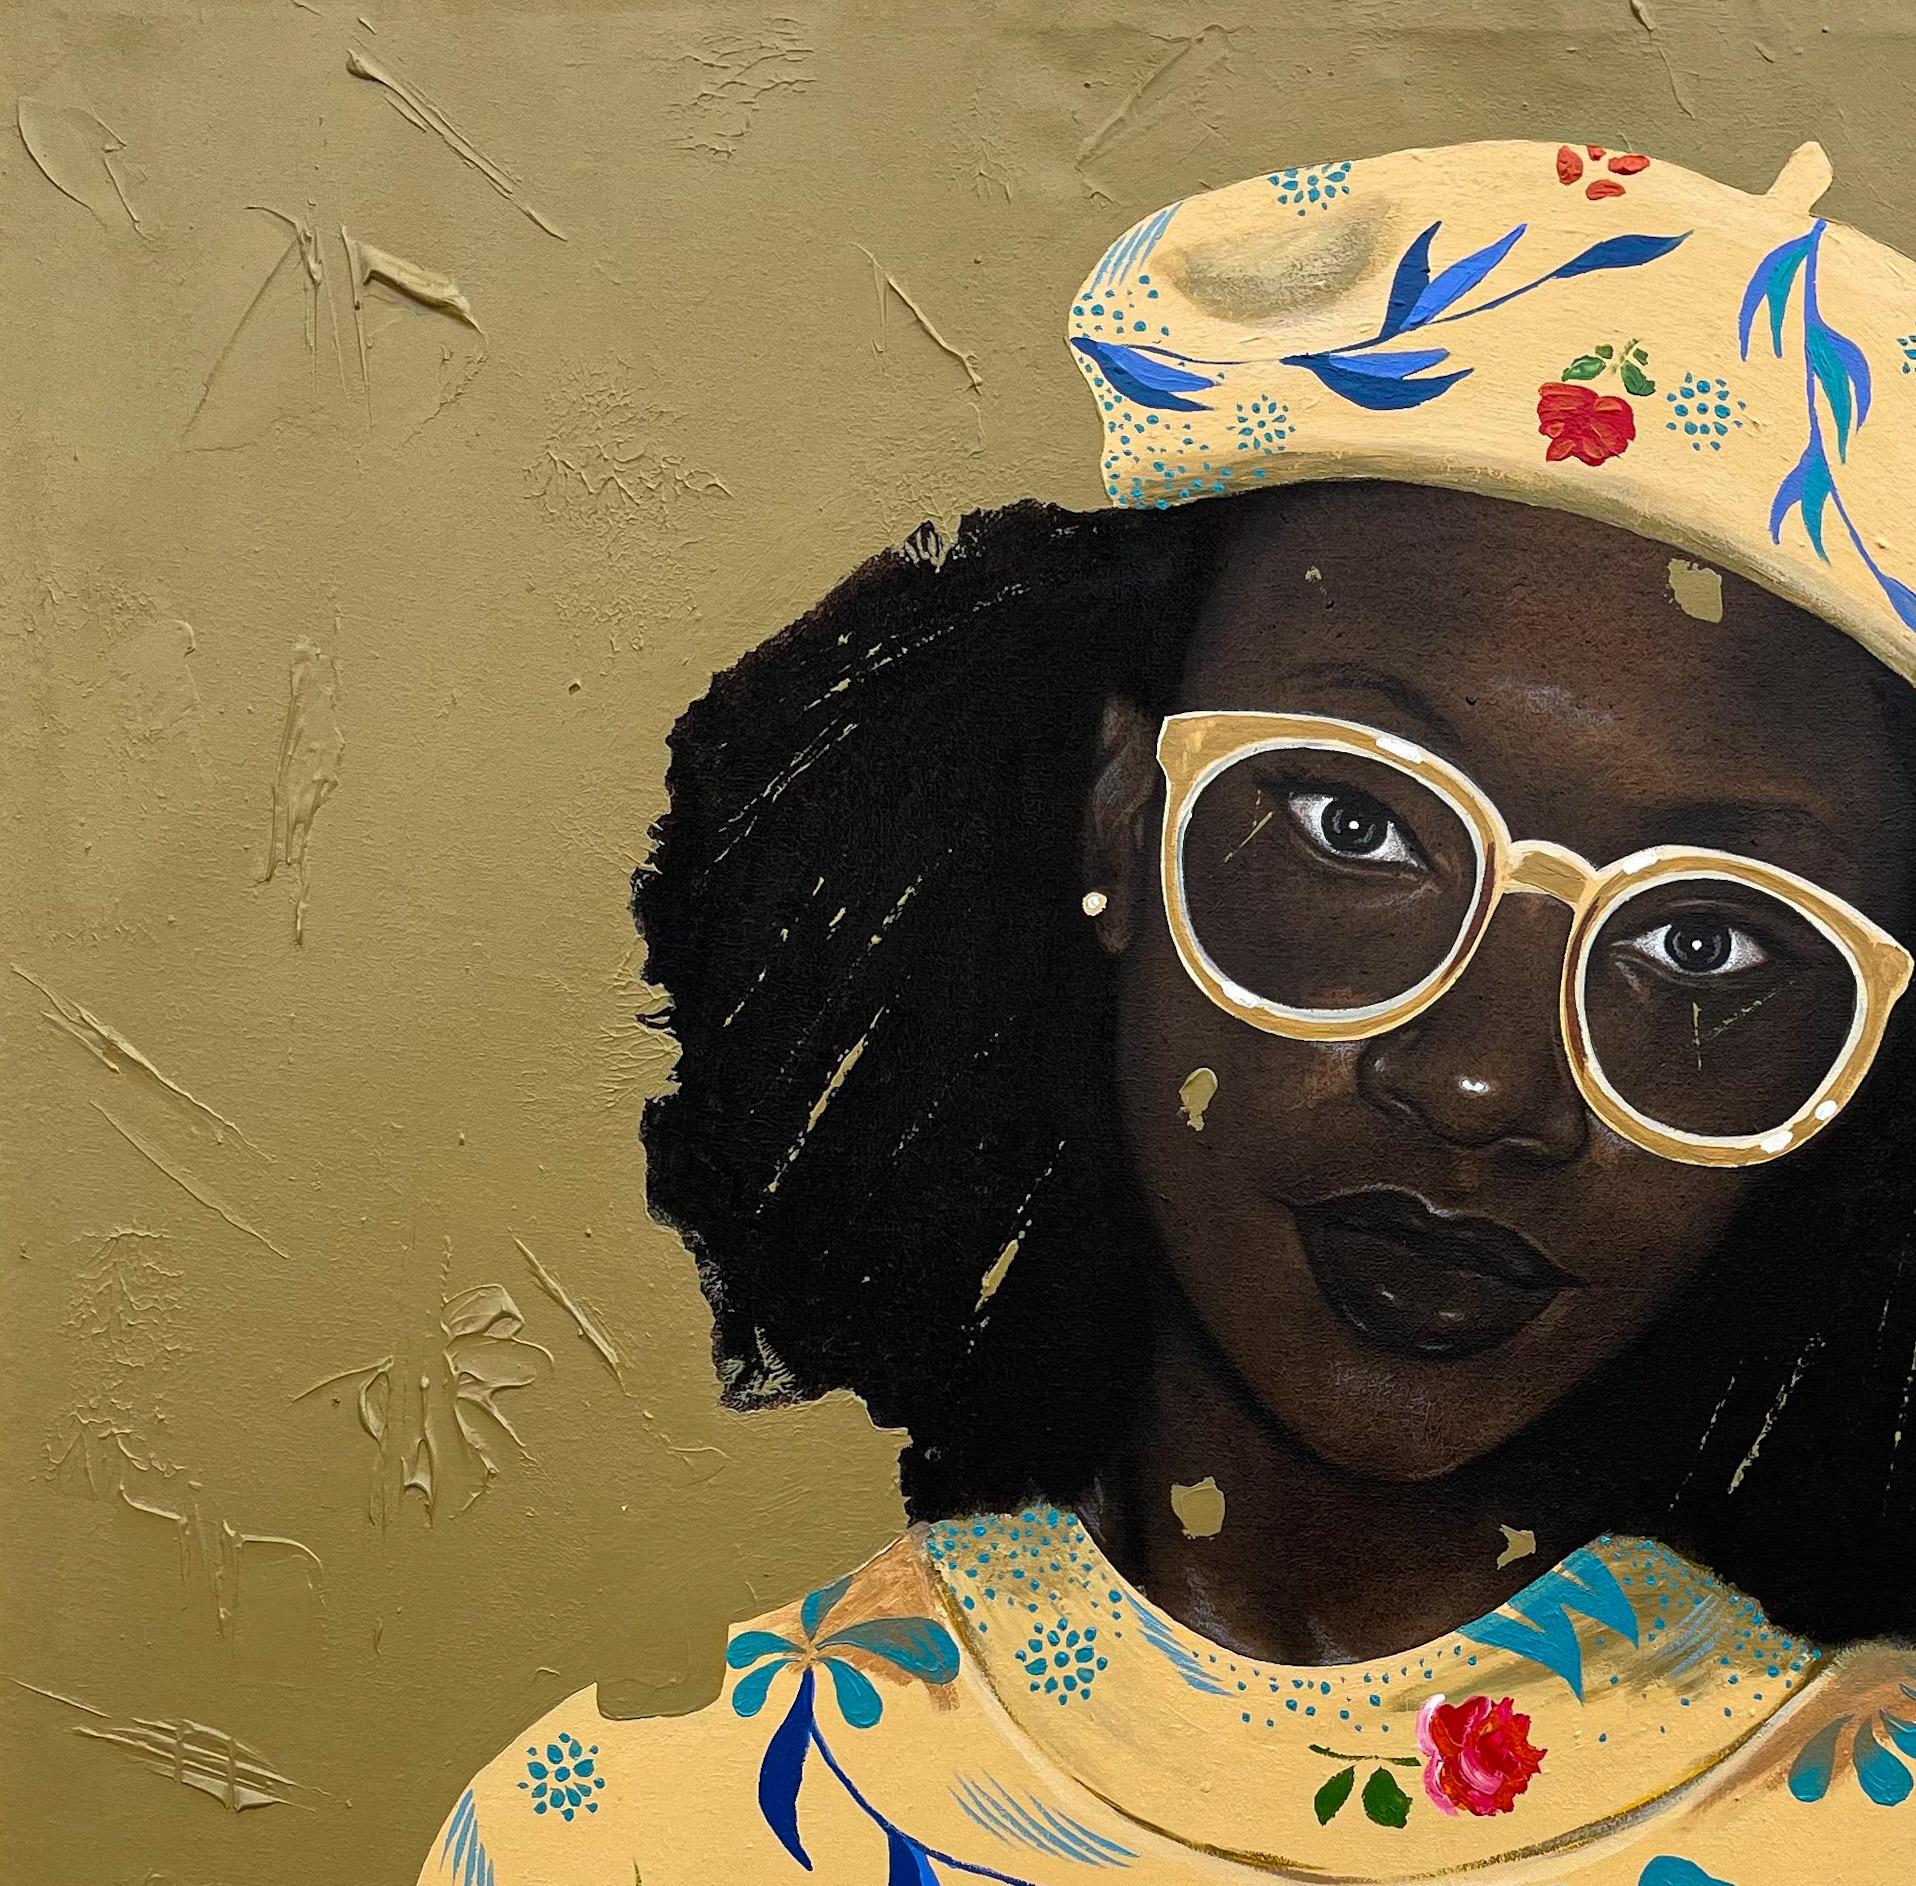 Big Sister - Contemporary Painting by Eyitayo Alagbe